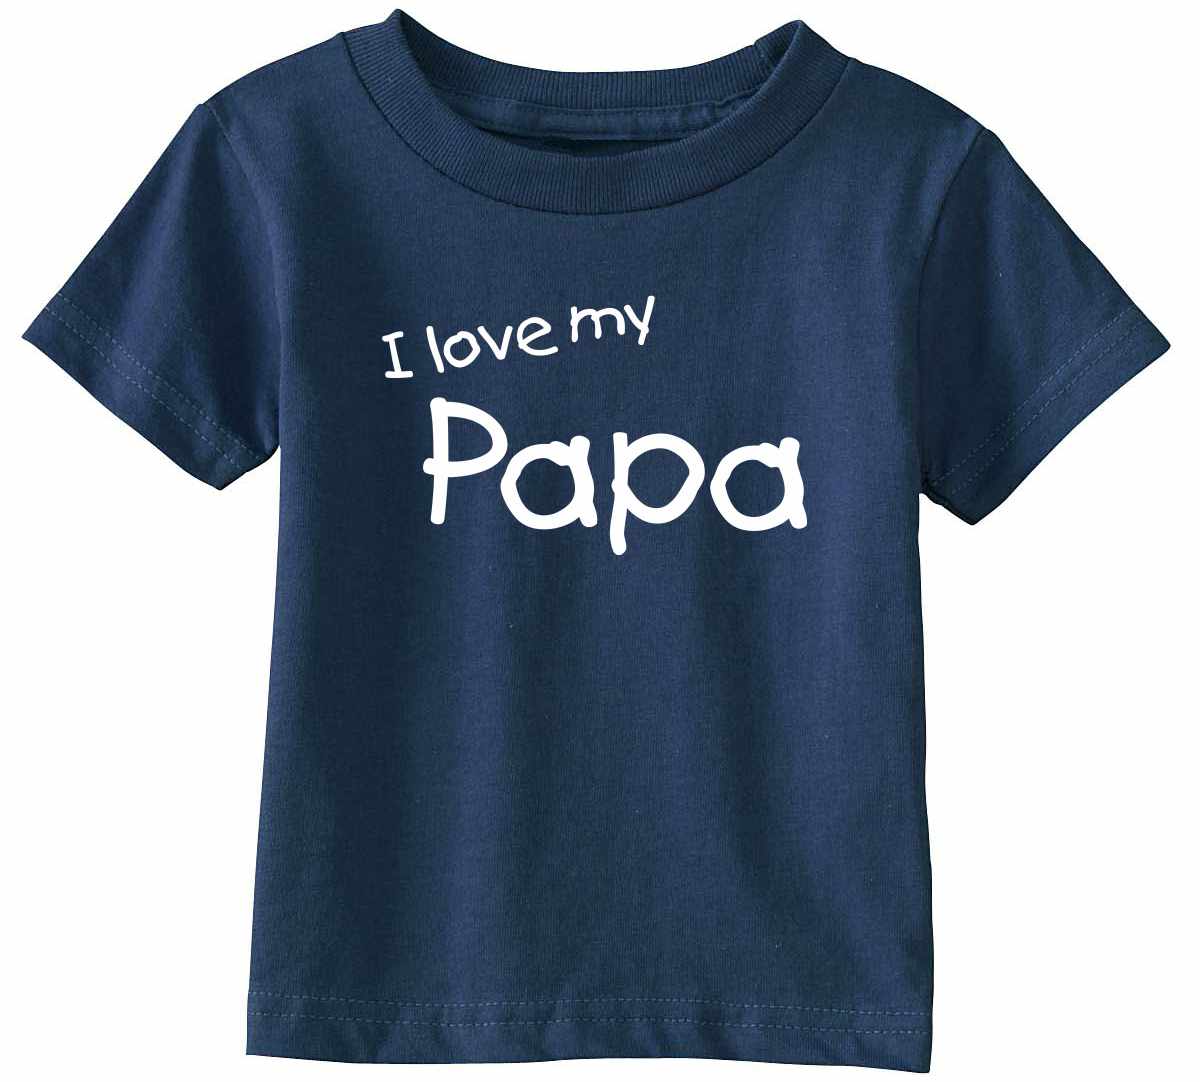 I Love My Papa on Infant-Toddler T-Shirt (#1315-7)